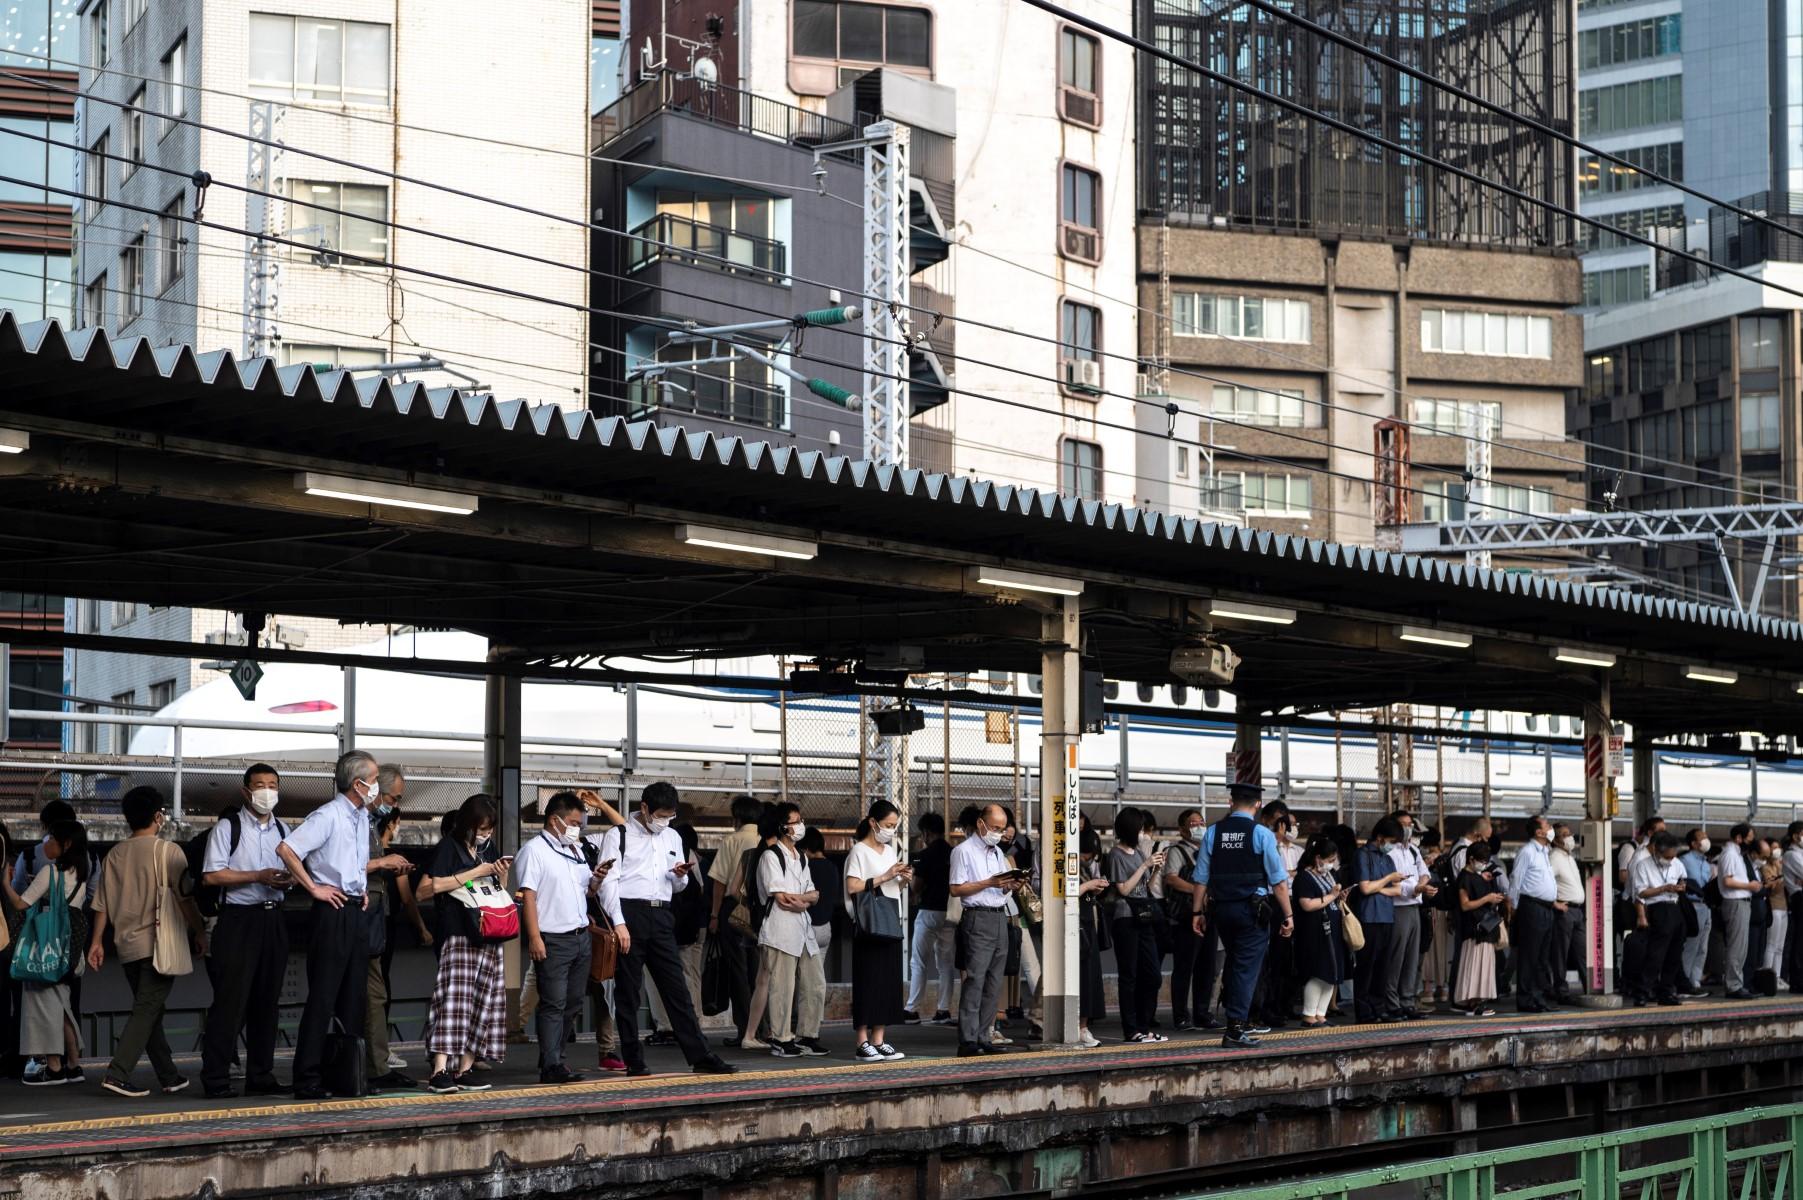 People stand on the platform as they wait for their train at a station in Tokyo on July 28, 2021. Photo: AFP